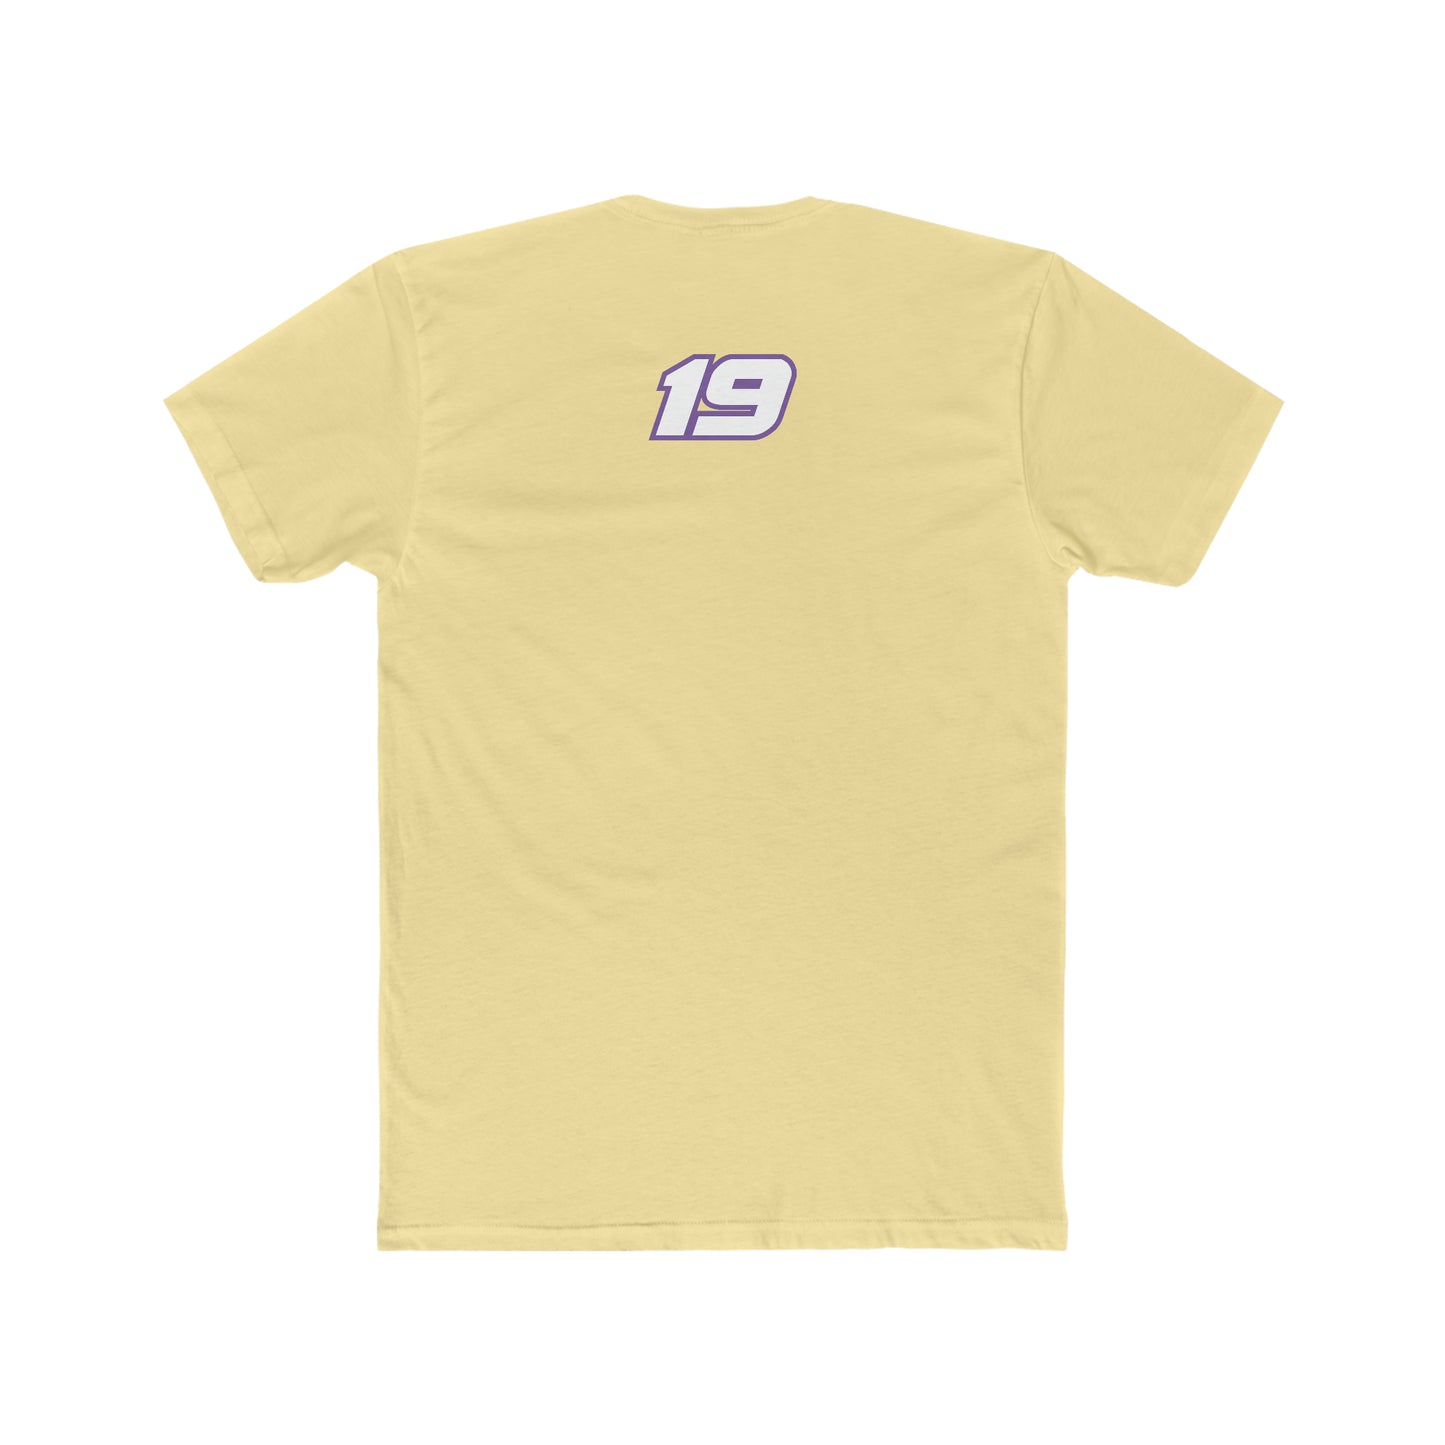 Curt Vincent Racing Race Day Tee